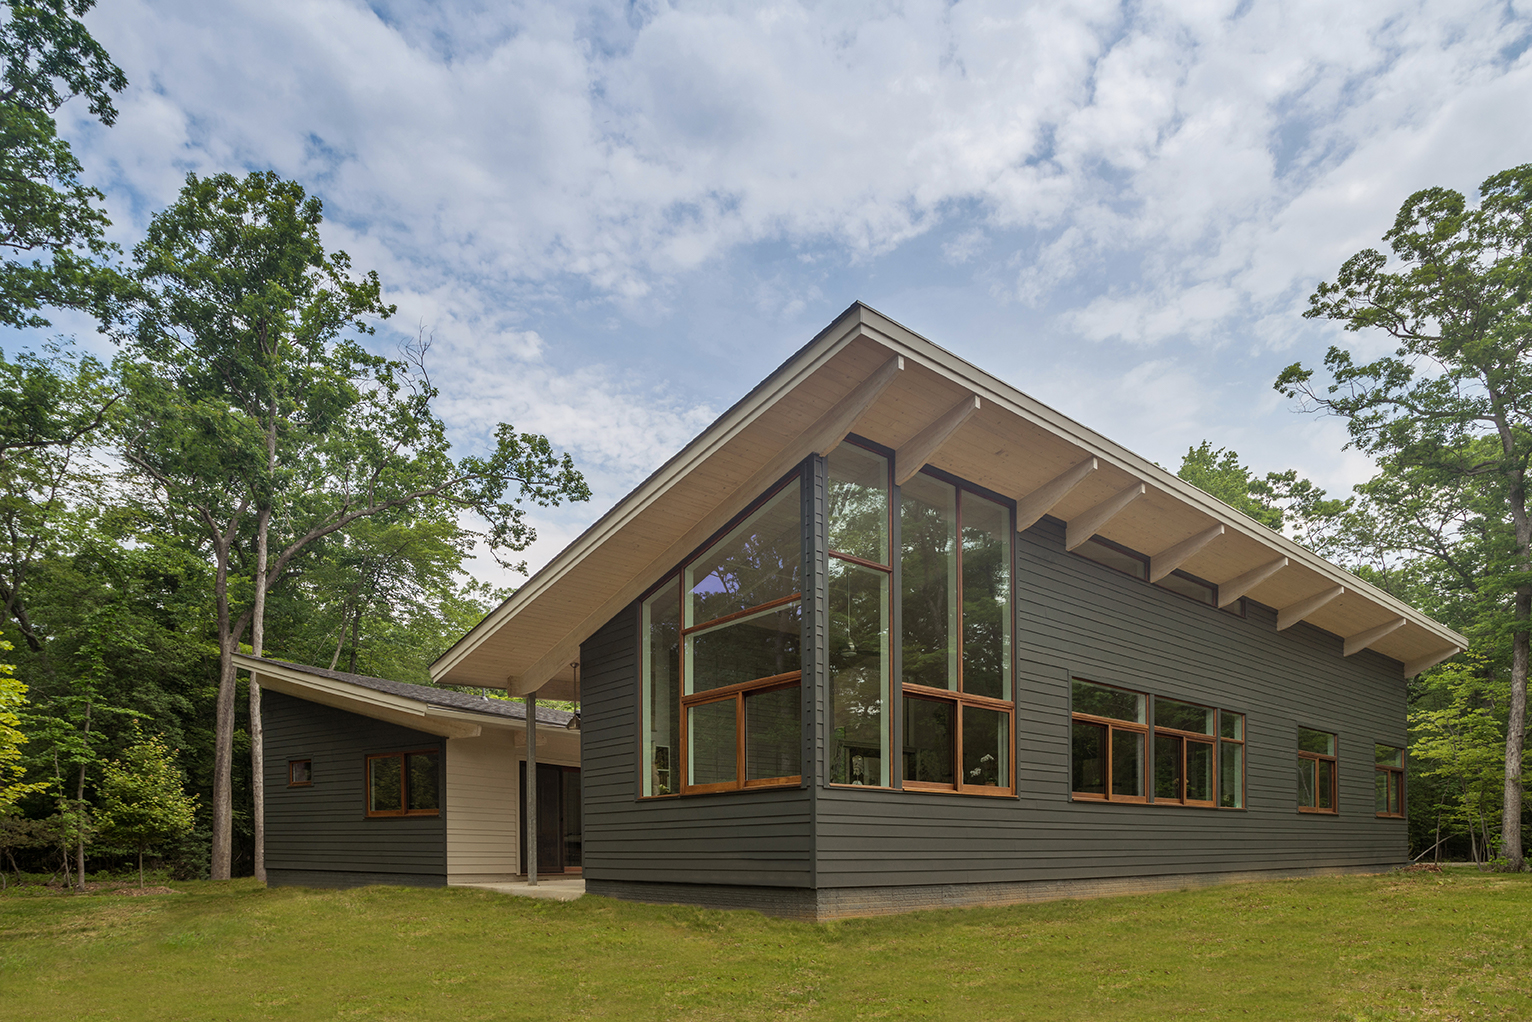 HingeHouse, in Collaboration with Maryann Thompson Architects